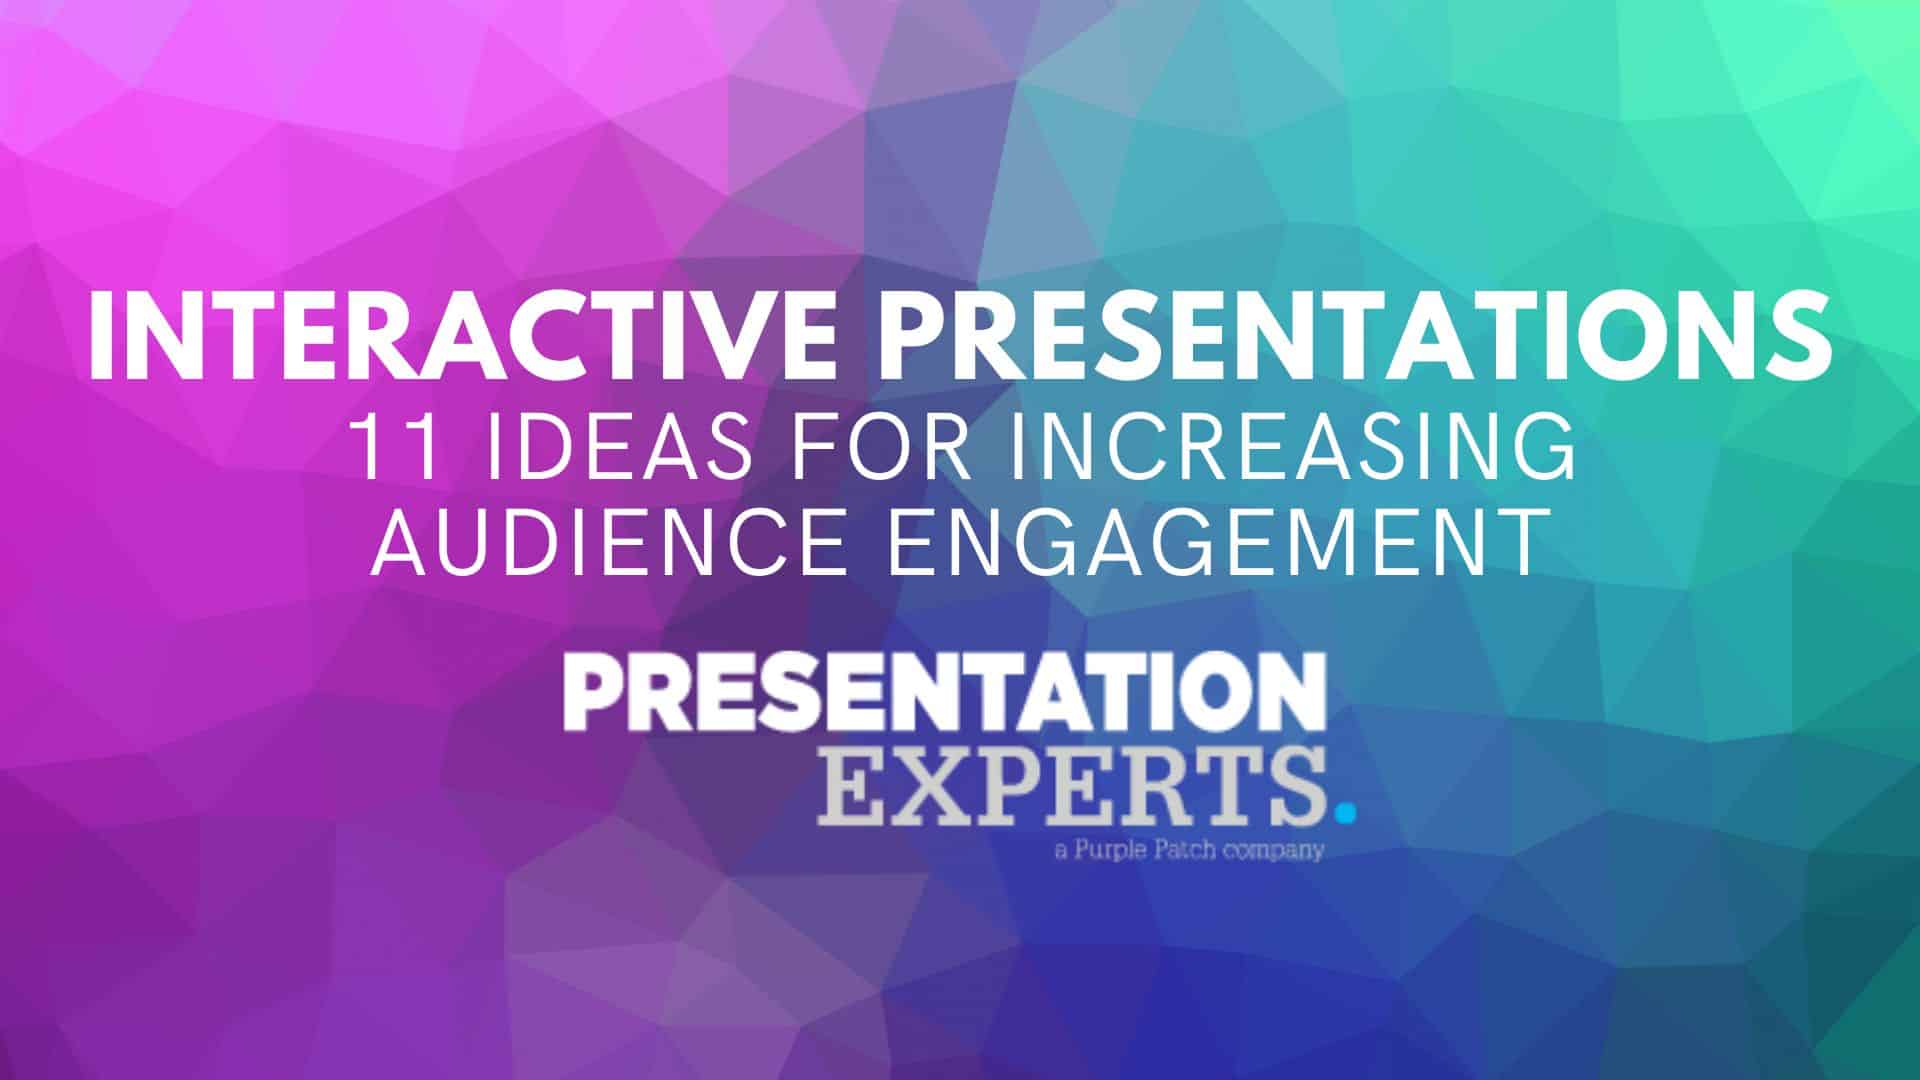 Interactive Presentations: 11 Ideas for Increasing Audience Engagement